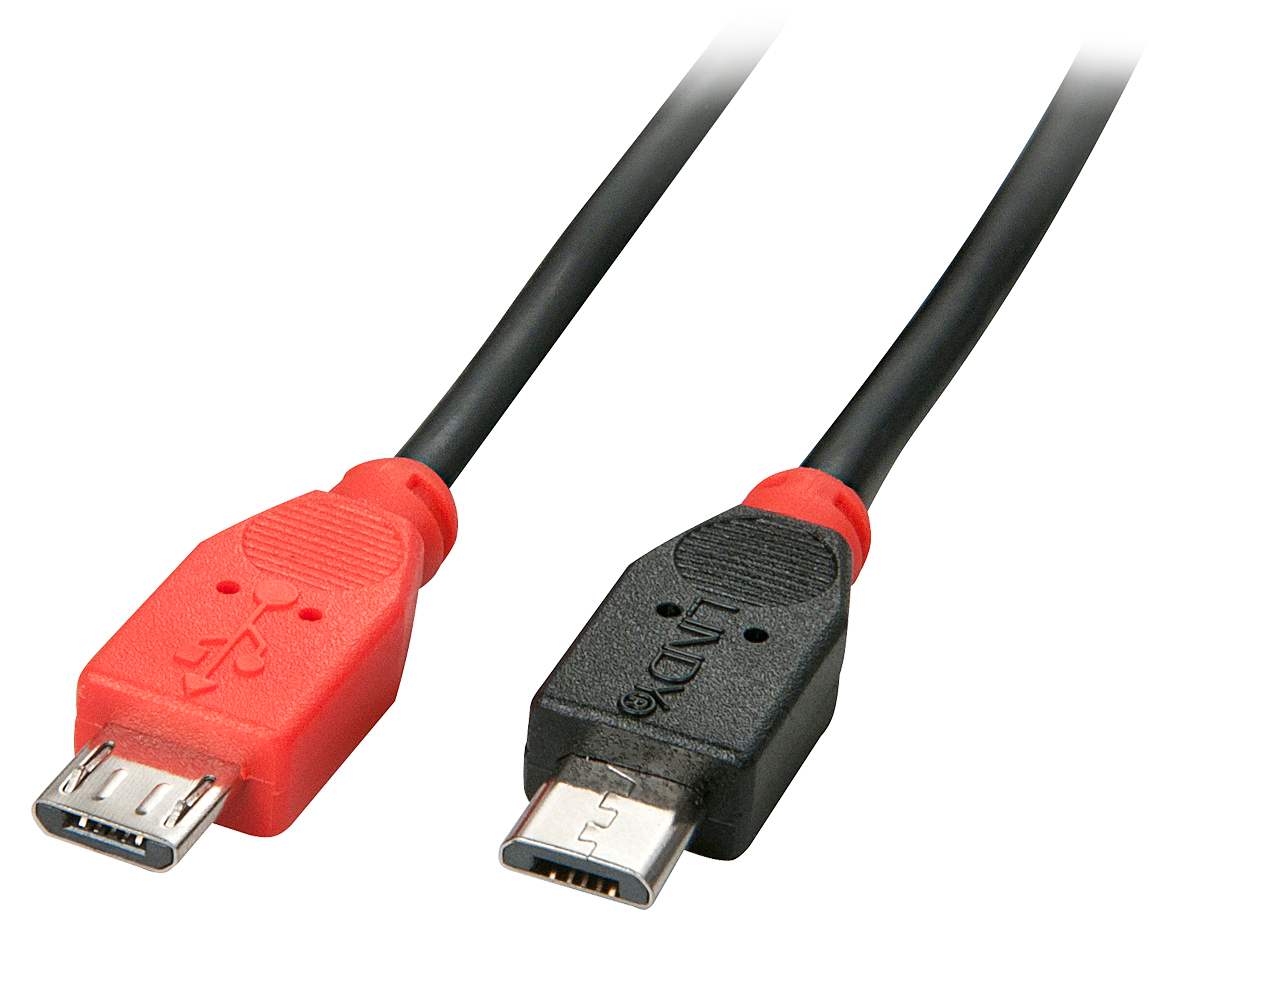 Photos - Cable (video, audio, USB) Lindy 1m USB 2.0 Type Micro-B to Micro-B OTG Cable 31759 